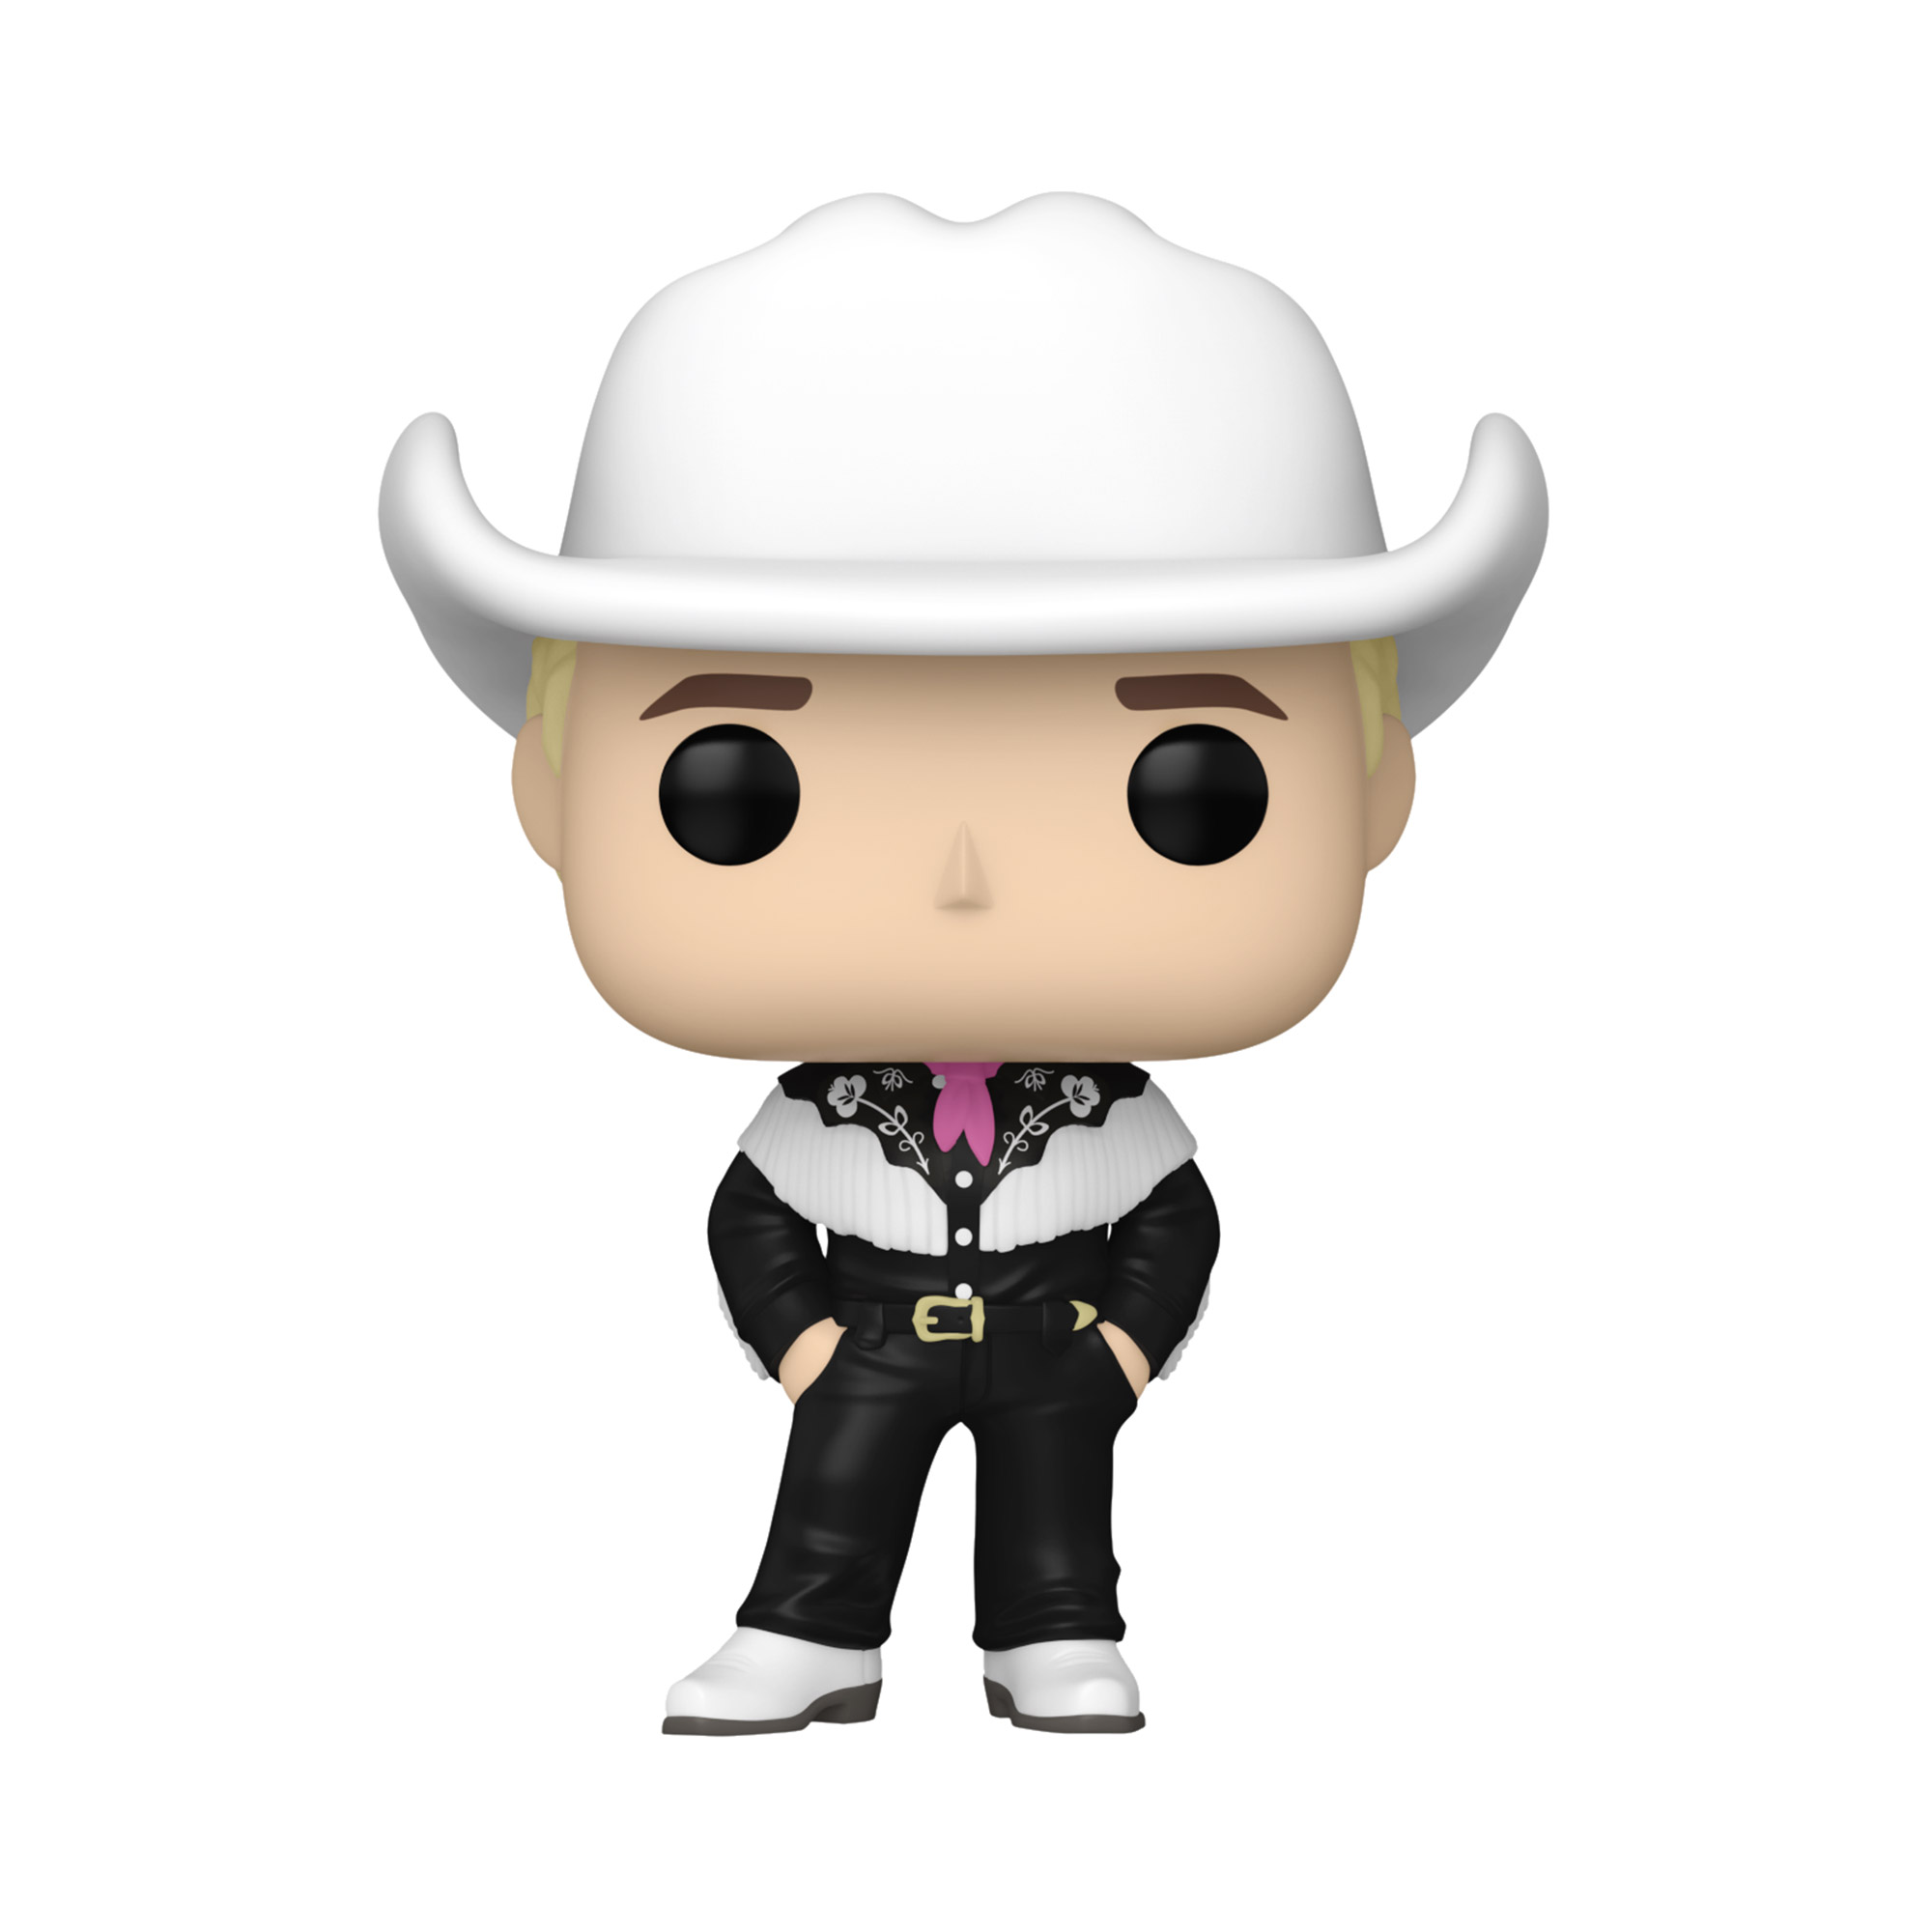 Pop! Western Ken wears a black cowboy outfit with a white cowboy hat.